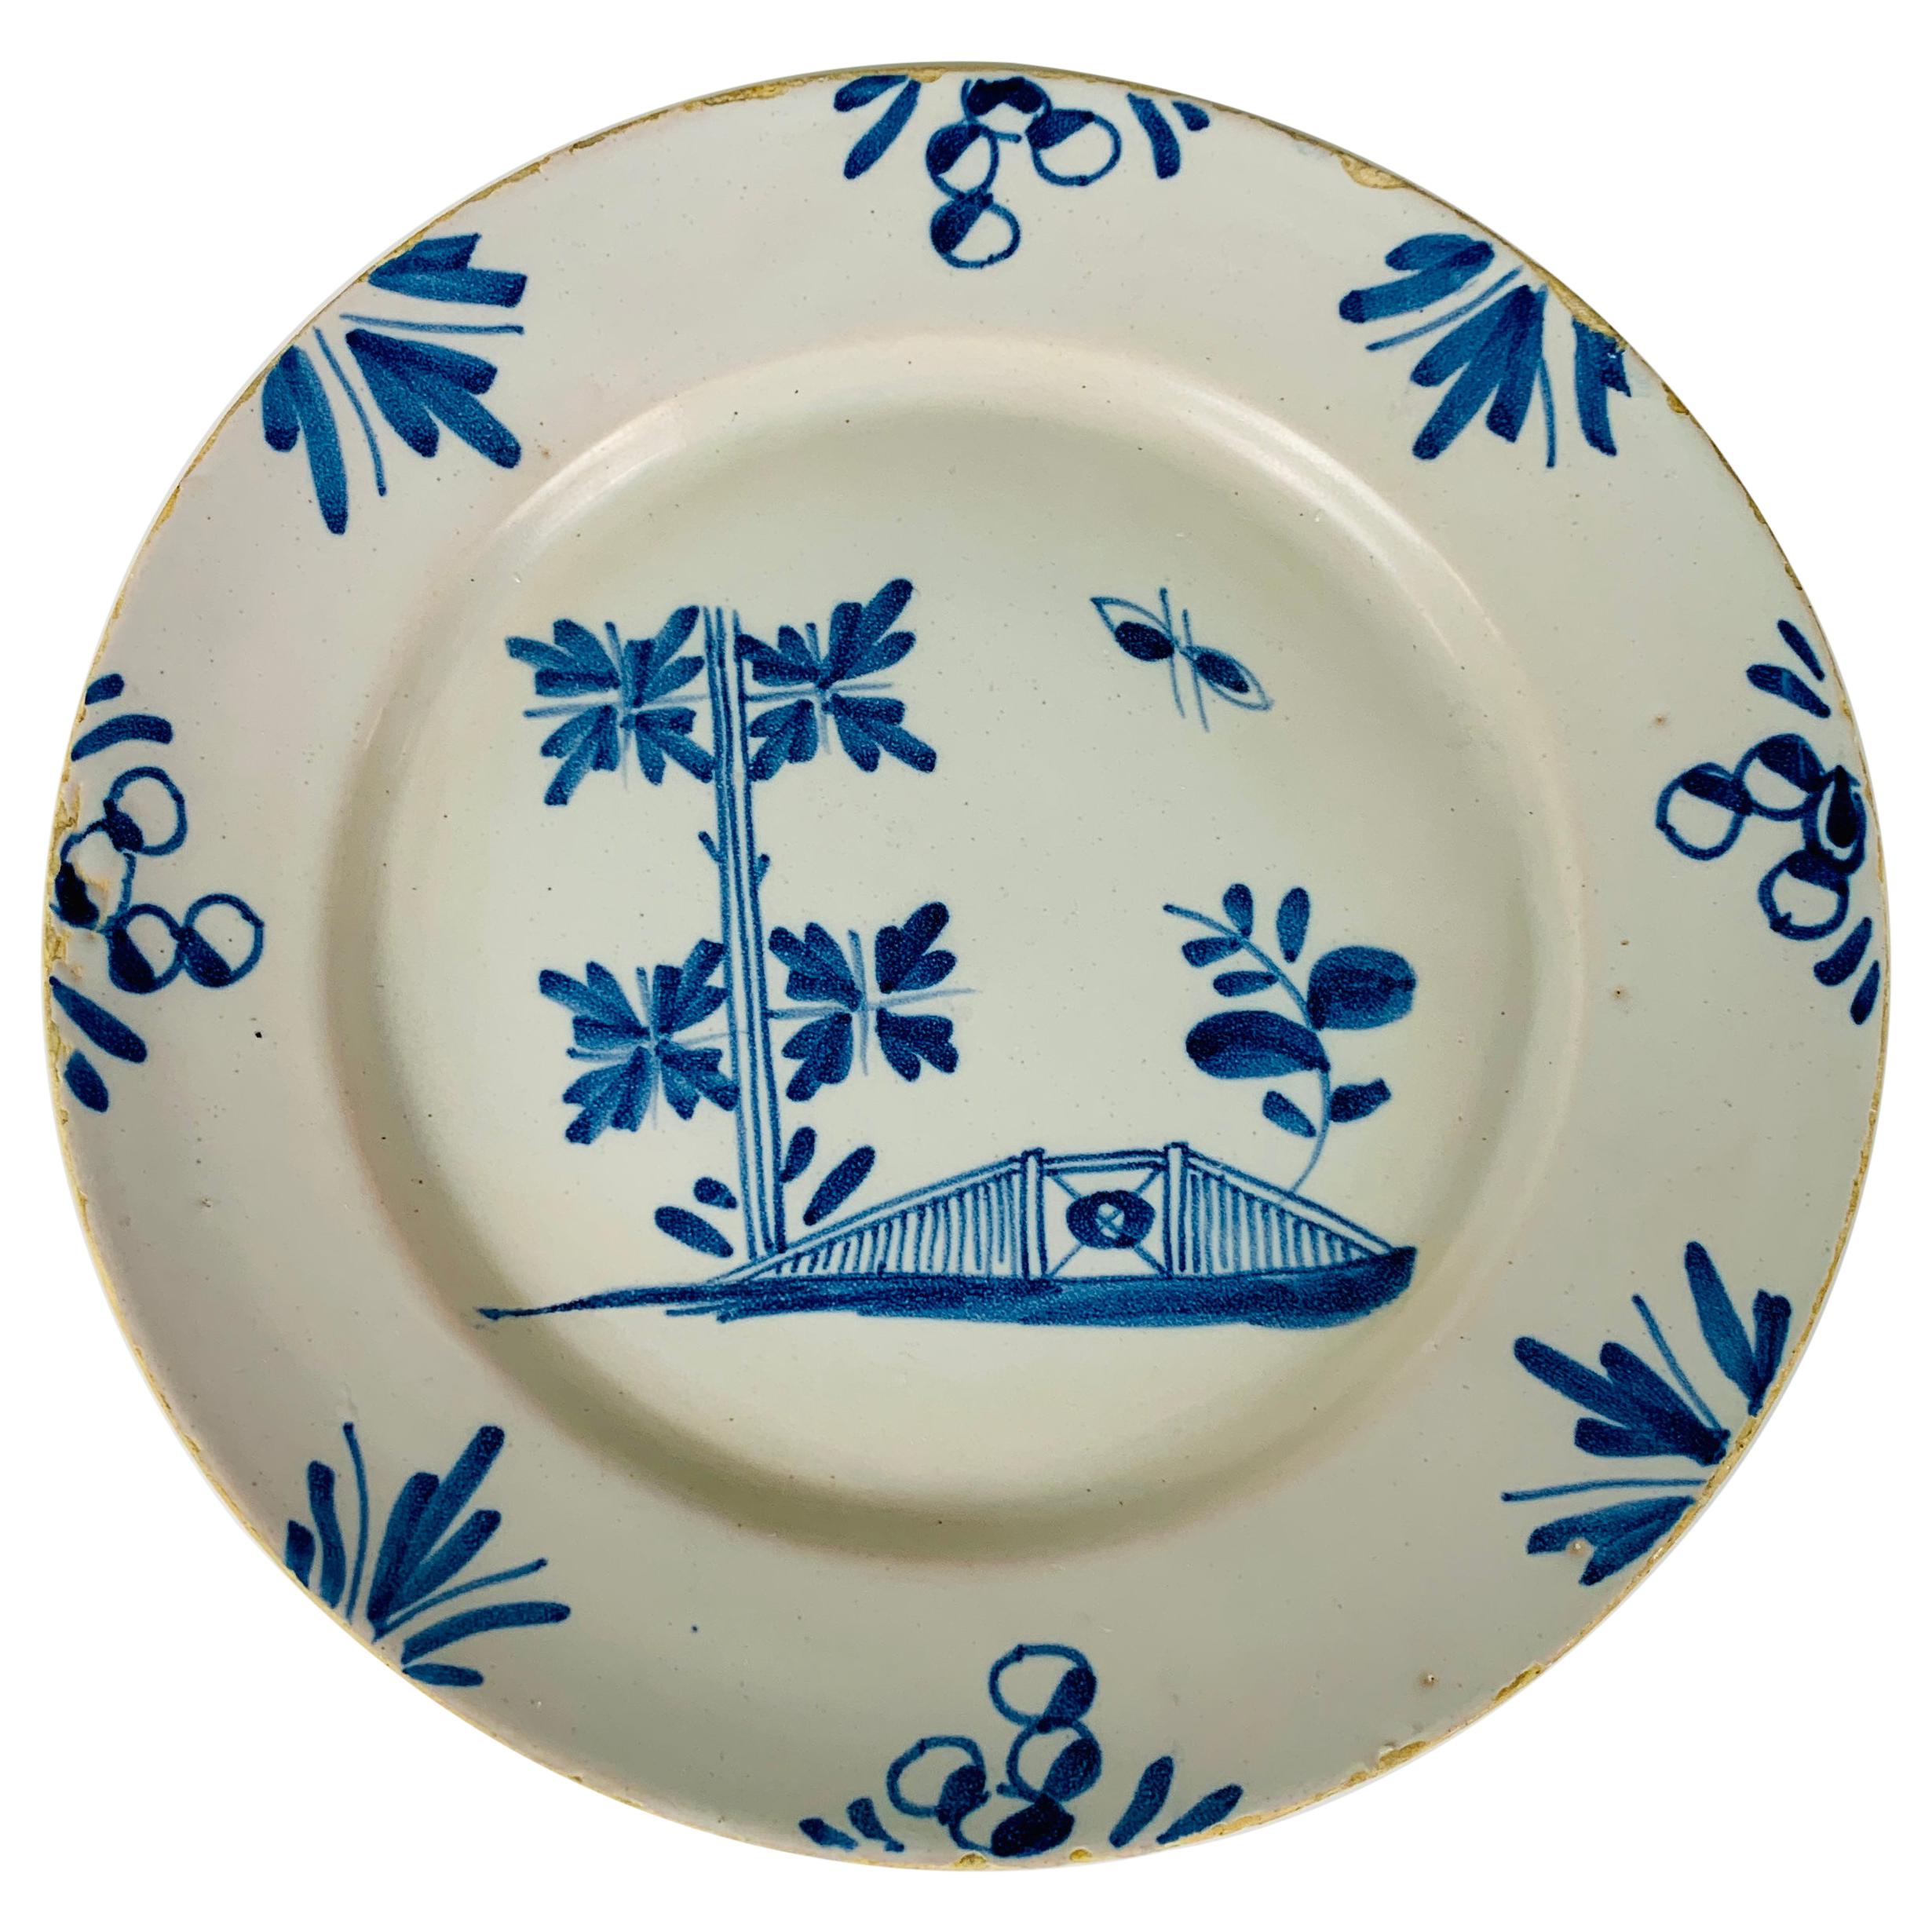 Small Blue and White Hand-Painted Delft Plate Made, circa 1740